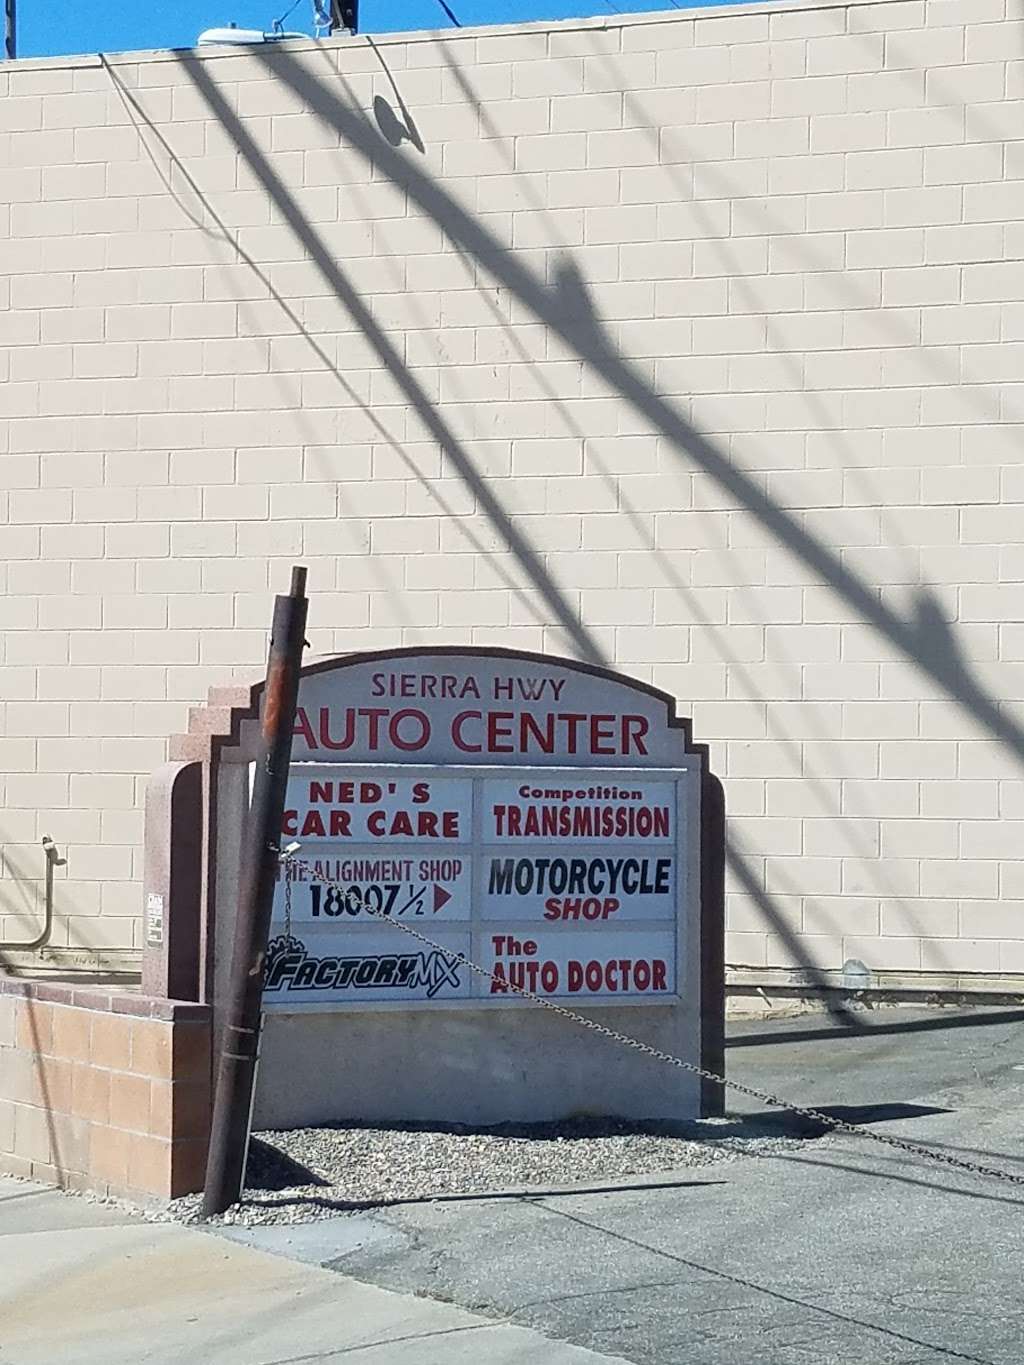 The Alignment Shop & Complete Auto Repair | 18007 1/2 SIERRA HWY, Canyon Country, CA 91351